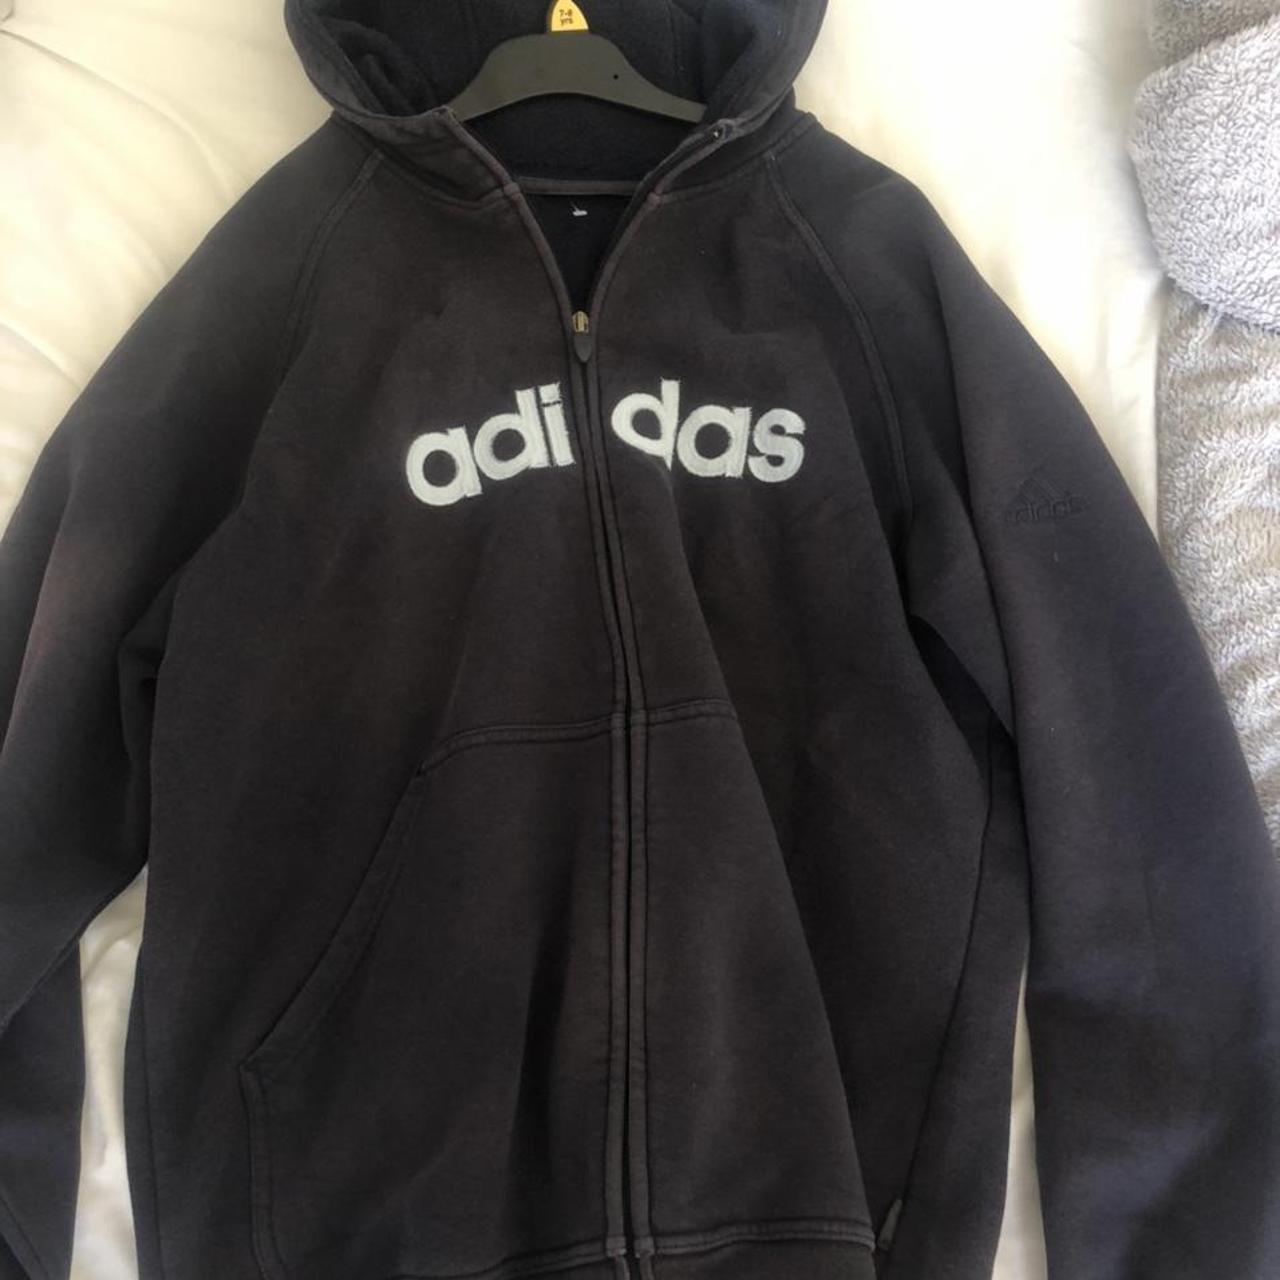 Vintage navy and blue adidas zip up Doesnt say a... - Depop